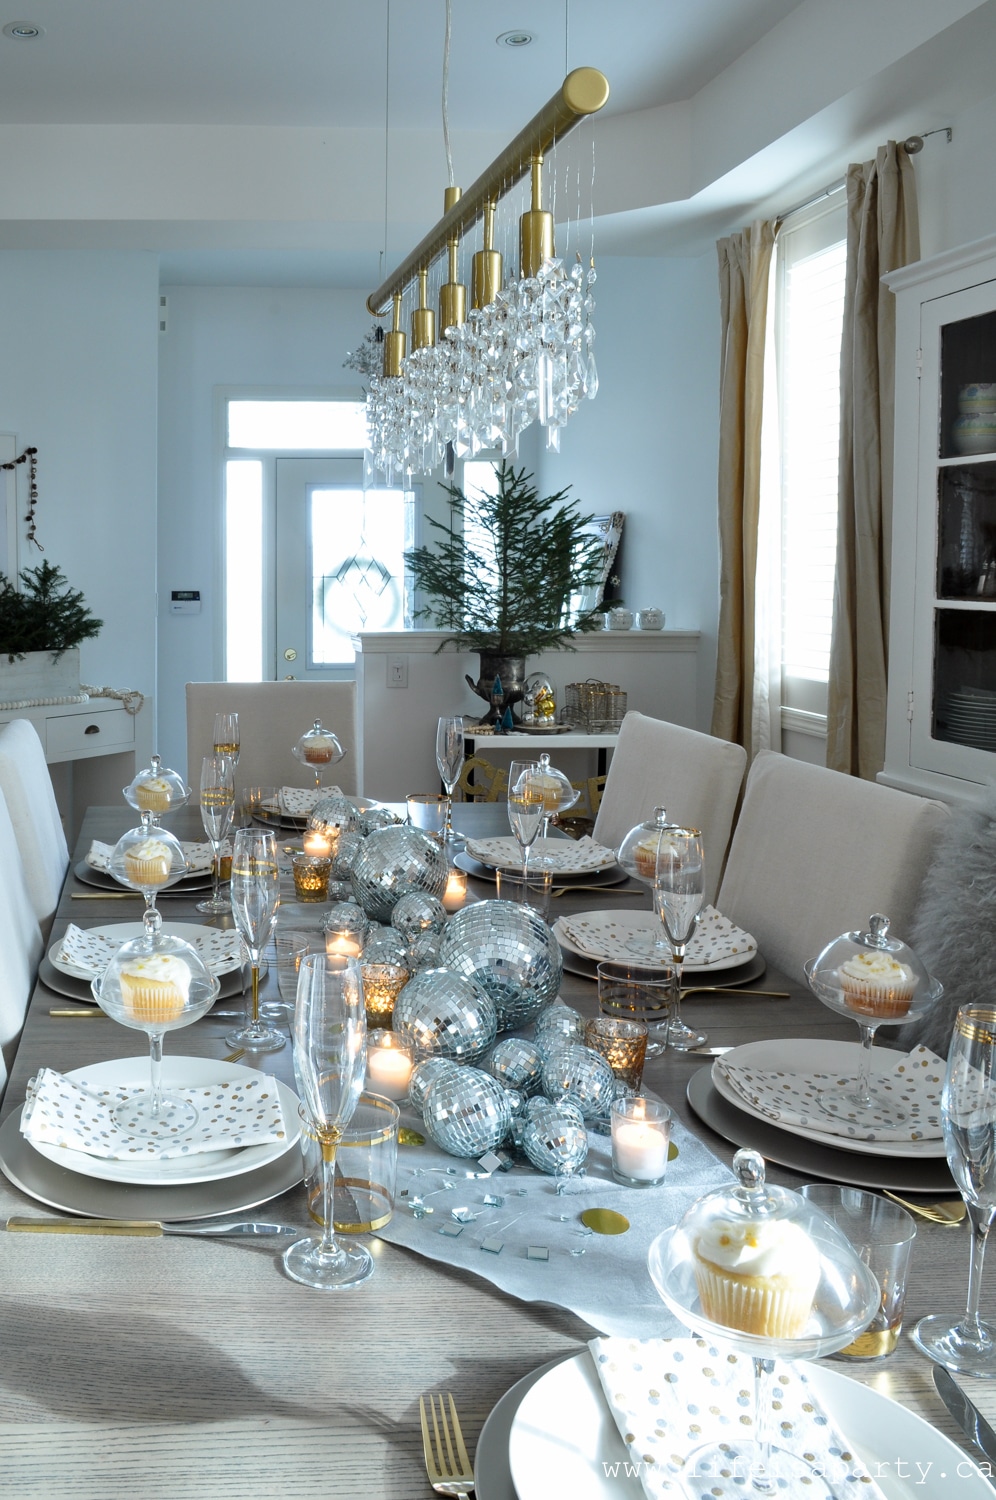 New Year's Eve dinner party ideas